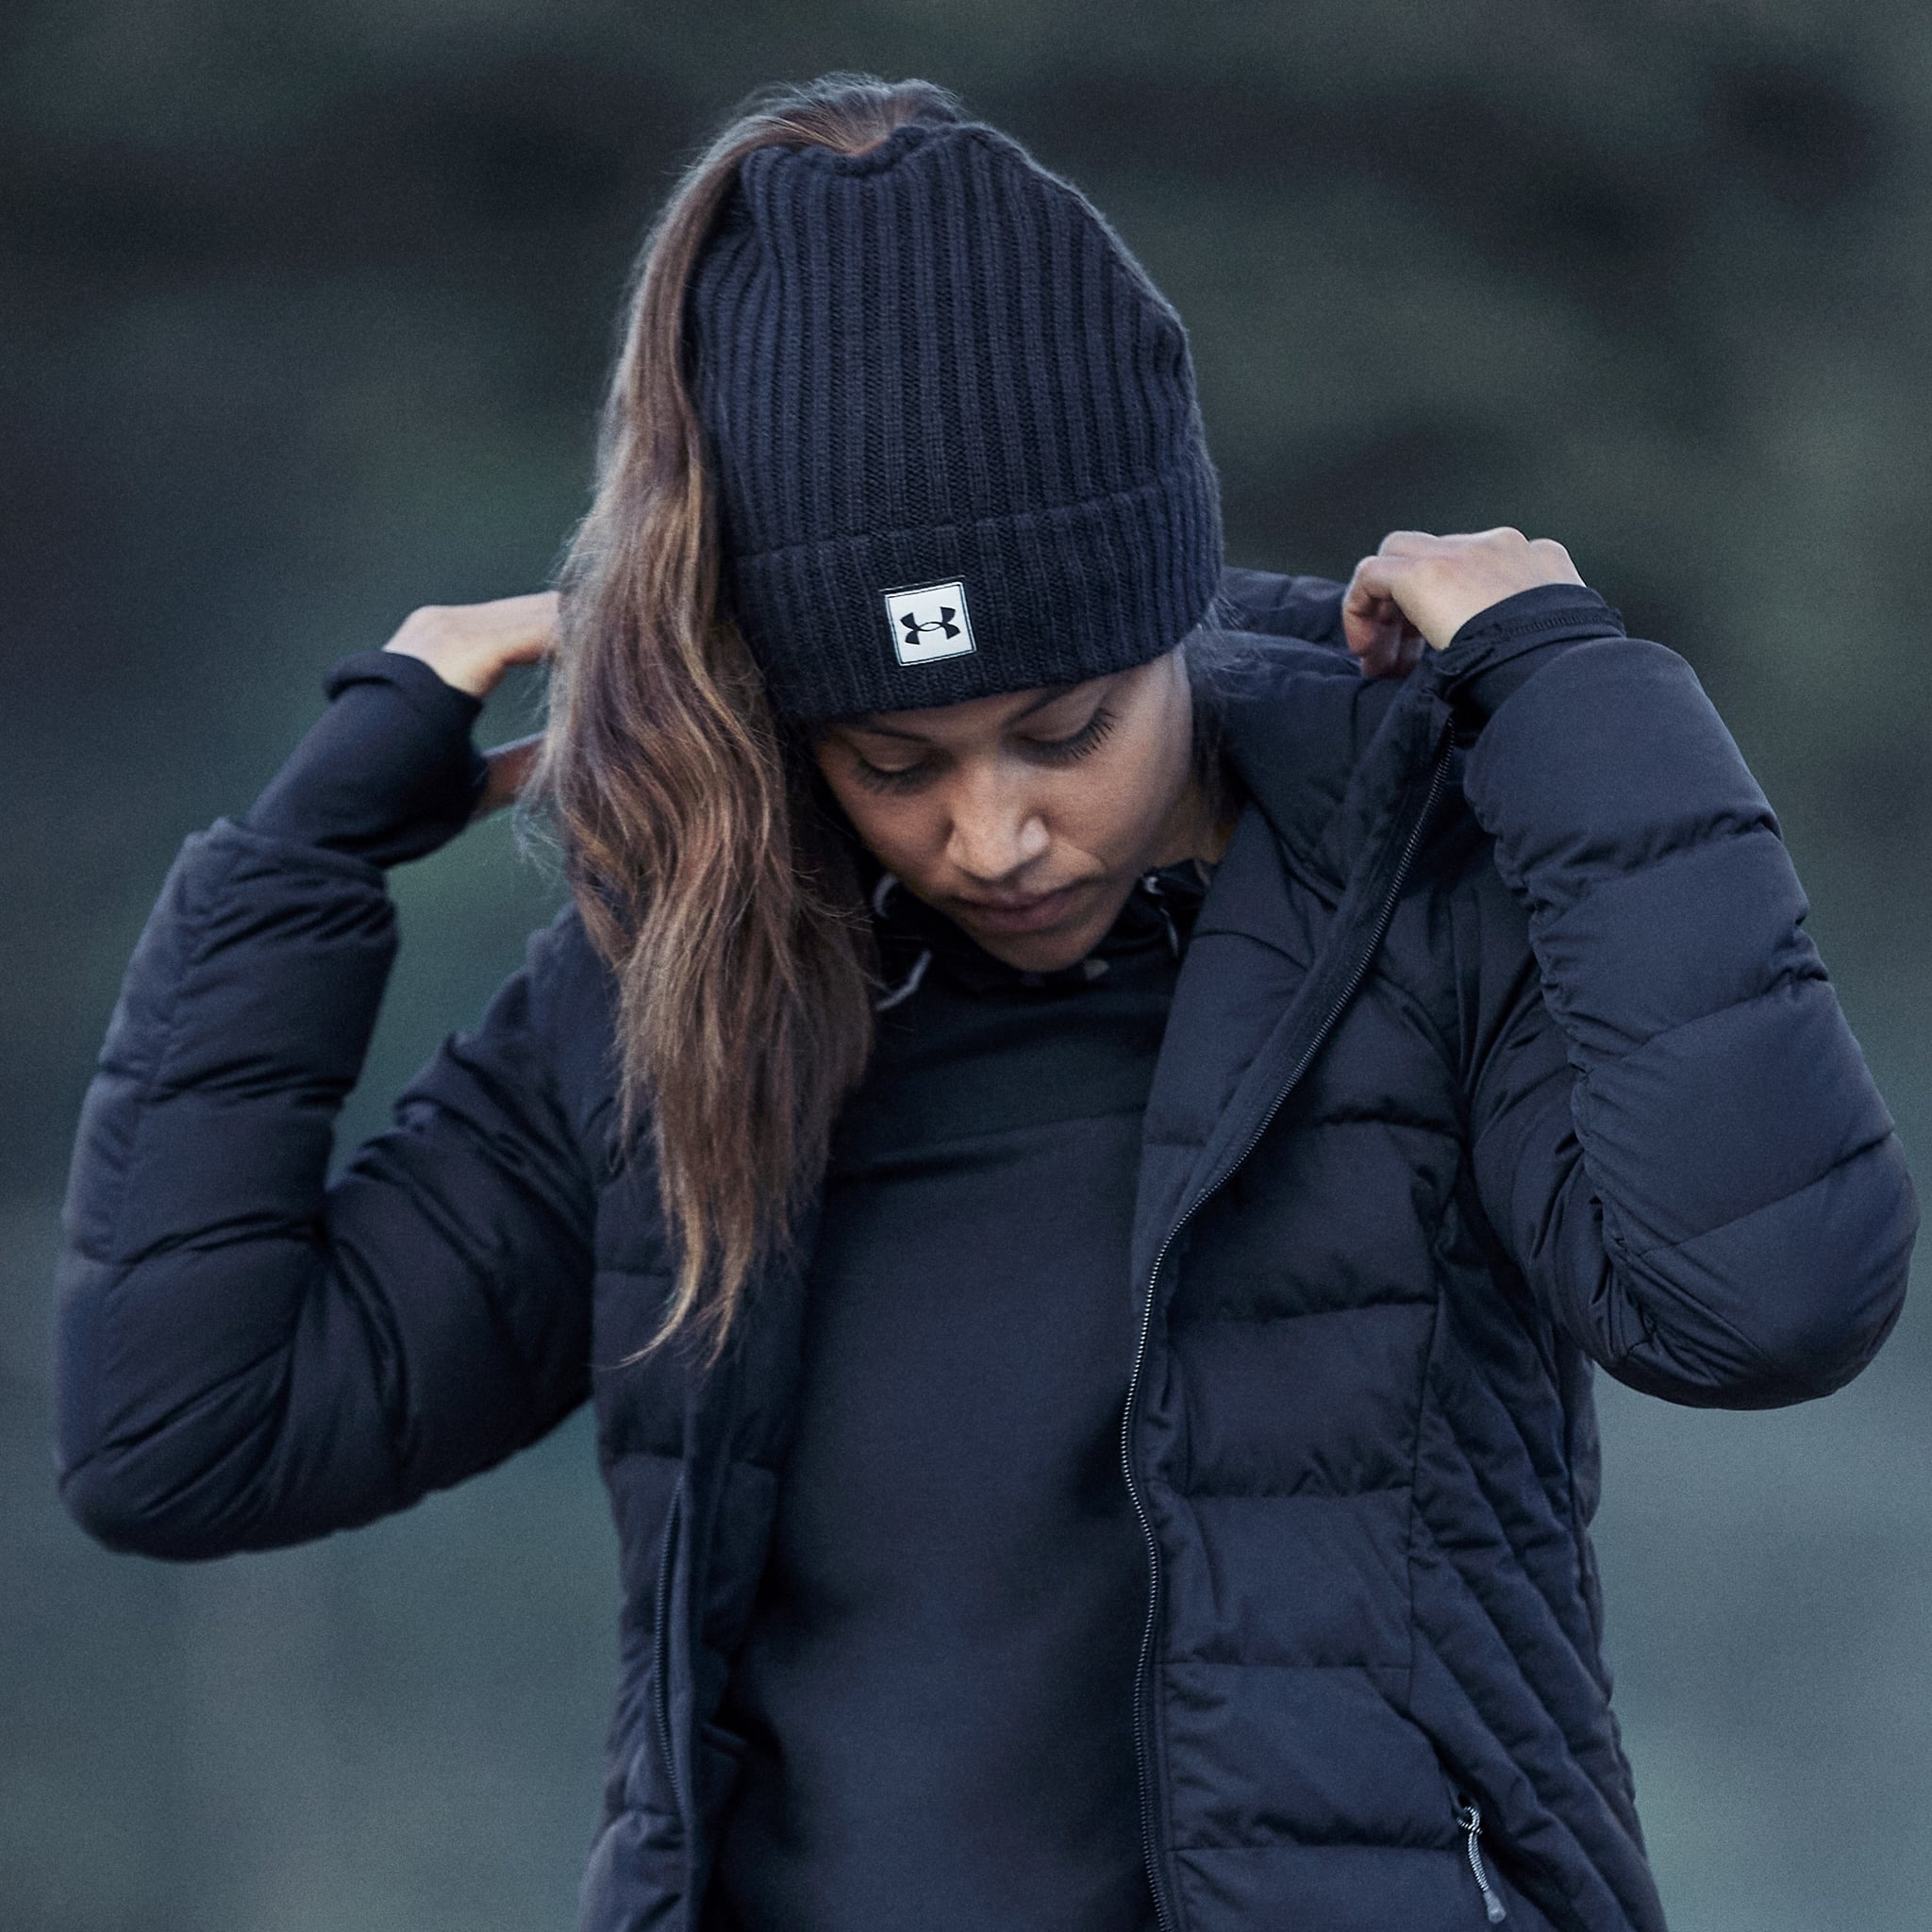 Shop These Hats and Ear Warmers For POPSUGAR Fitness